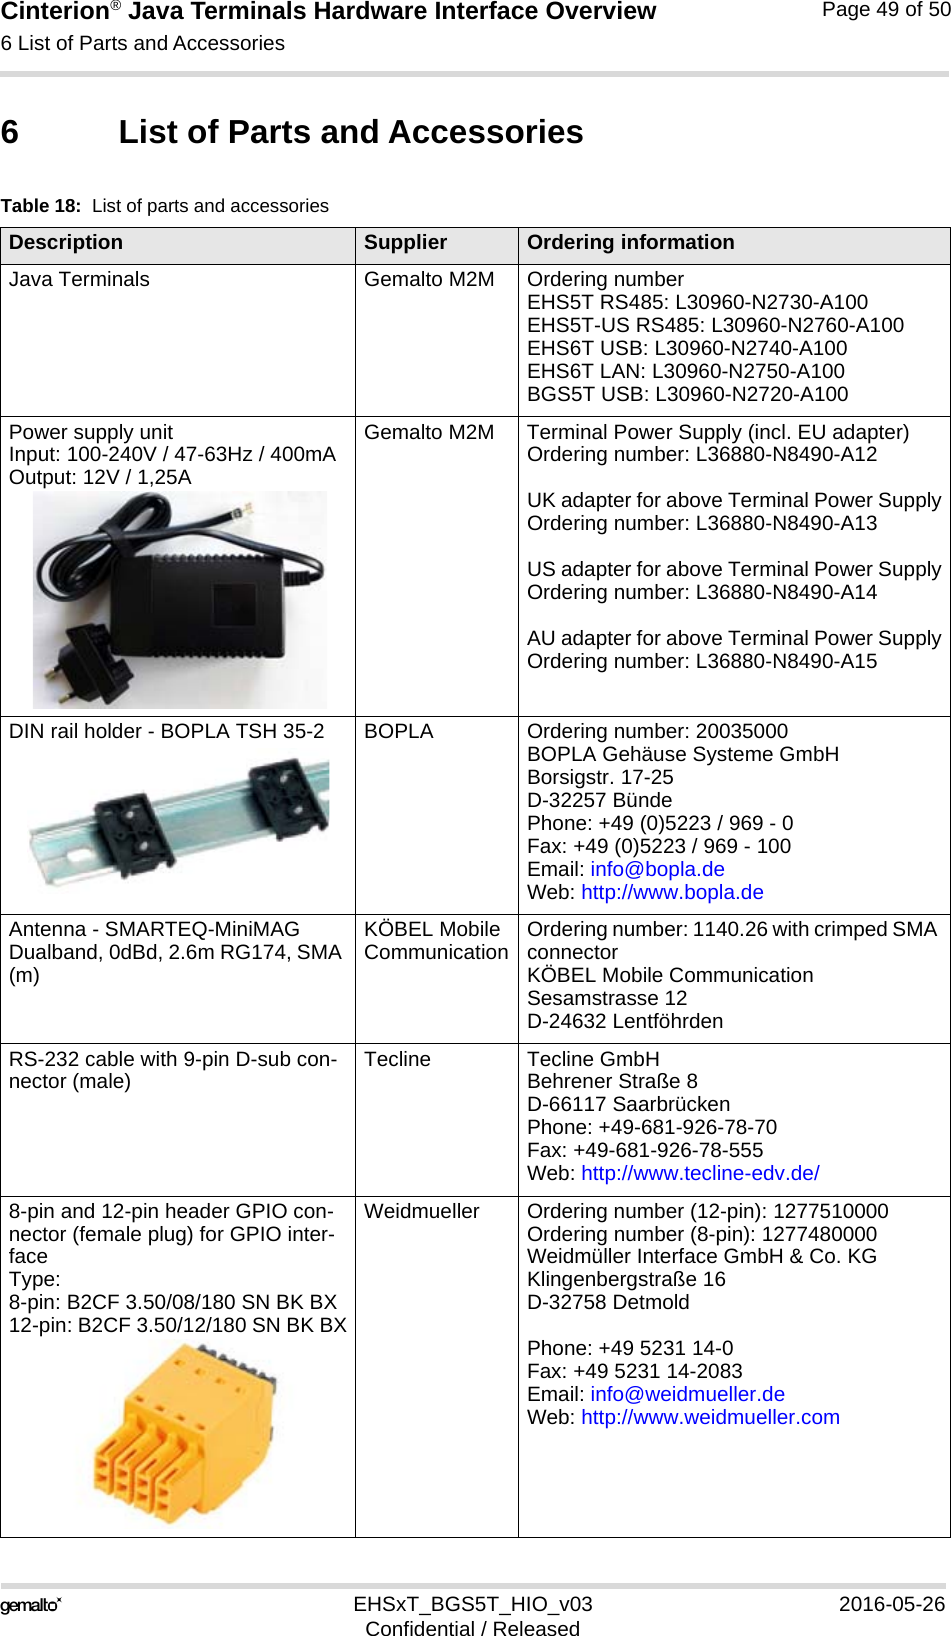 Cinterion® Java Terminals Hardware Interface Overview6 List of Parts and Accessories49EHSxT_BGS5T_HIO_v03 2016-05-26Confidential / ReleasedPage 49 of 506 List of Parts and AccessoriesTable 18:  List of parts and accessoriesDescription Supplier Ordering informationJava Terminals  Gemalto M2M Ordering numberEHS5T RS485: L30960-N2730-A100EHS5T-US RS485: L30960-N2760-A100EHS6T USB: L30960-N2740-A100EHS6T LAN: L30960-N2750-A100BGS5T USB: L30960-N2720-A100Power supply unitInput: 100-240V / 47-63Hz / 400mAOutput: 12V / 1,25AGemalto M2M Terminal Power Supply (incl. EU adapter)Ordering number: L36880-N8490-A12UK adapter for above Terminal Power SupplyOrdering number: L36880-N8490-A13US adapter for above Terminal Power SupplyOrdering number: L36880-N8490-A14AU adapter for above Terminal Power SupplyOrdering number: L36880-N8490-A15DIN rail holder - BOPLA TSH 35-2 BOPLA Ordering number: 20035000BOPLA Gehäuse Systeme GmbHBorsigstr. 17-25D-32257 BündePhone: +49 (0)5223 / 969 - 0Fax: +49 (0)5223 / 969 - 100Email: info@bopla.deWeb: http://www.bopla.deAntenna - SMARTEQ-MiniMAG Dualband, 0dBd, 2.6m RG174, SMA (m)KÖBEL Mobile Communication Ordering number: 1140.26 with crimped SMA connectorKÖBEL Mobile CommunicationSesamstrasse 12D-24632 LentföhrdenRS-232 cable with 9-pin D-sub con-nector (male) Tecline Tecline GmbHBehrener Straße 8D-66117 SaarbrückenPhone: +49-681-926-78-70Fax: +49-681-926-78-555Web: http://www.tecline-edv.de/8-pin and 12-pin header GPIO con-nector (female plug) for GPIO inter-faceType: 8-pin: B2CF 3.50/08/180 SN BK BX12-pin: B2CF 3.50/12/180 SN BK BXWeidmueller Ordering number (12-pin): 1277510000Ordering number (8-pin): 1277480000Weidmüller Interface GmbH &amp; Co. KGKlingenbergstraße 16D-32758 DetmoldPhone: +49 5231 14-0Fax: +49 5231 14-2083 Email: info@weidmueller.deWeb: http://www.weidmueller.com